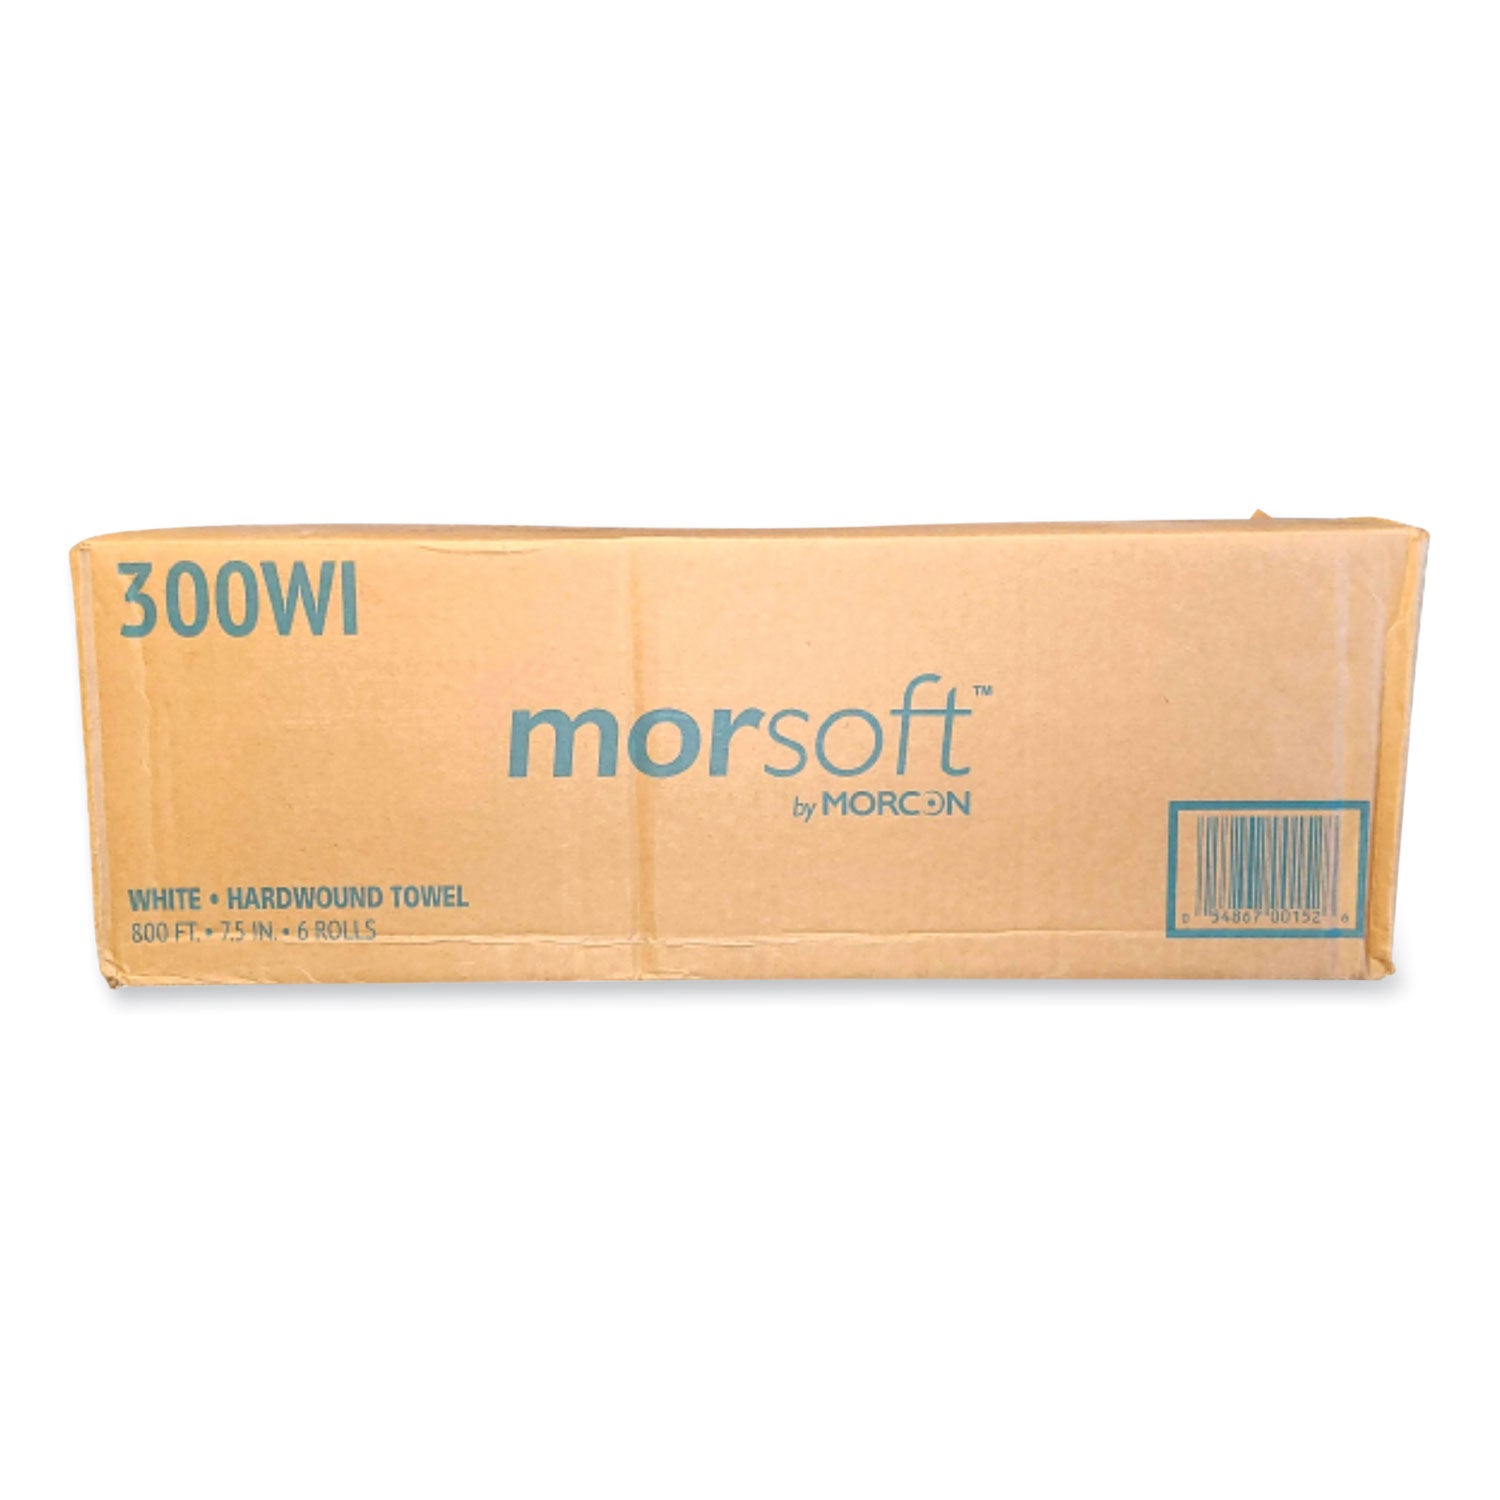 morsoft-controlled-towels-i-notch-1-ply-75-x-800-ft-white-6-rolls-carton_mor300wi - 5